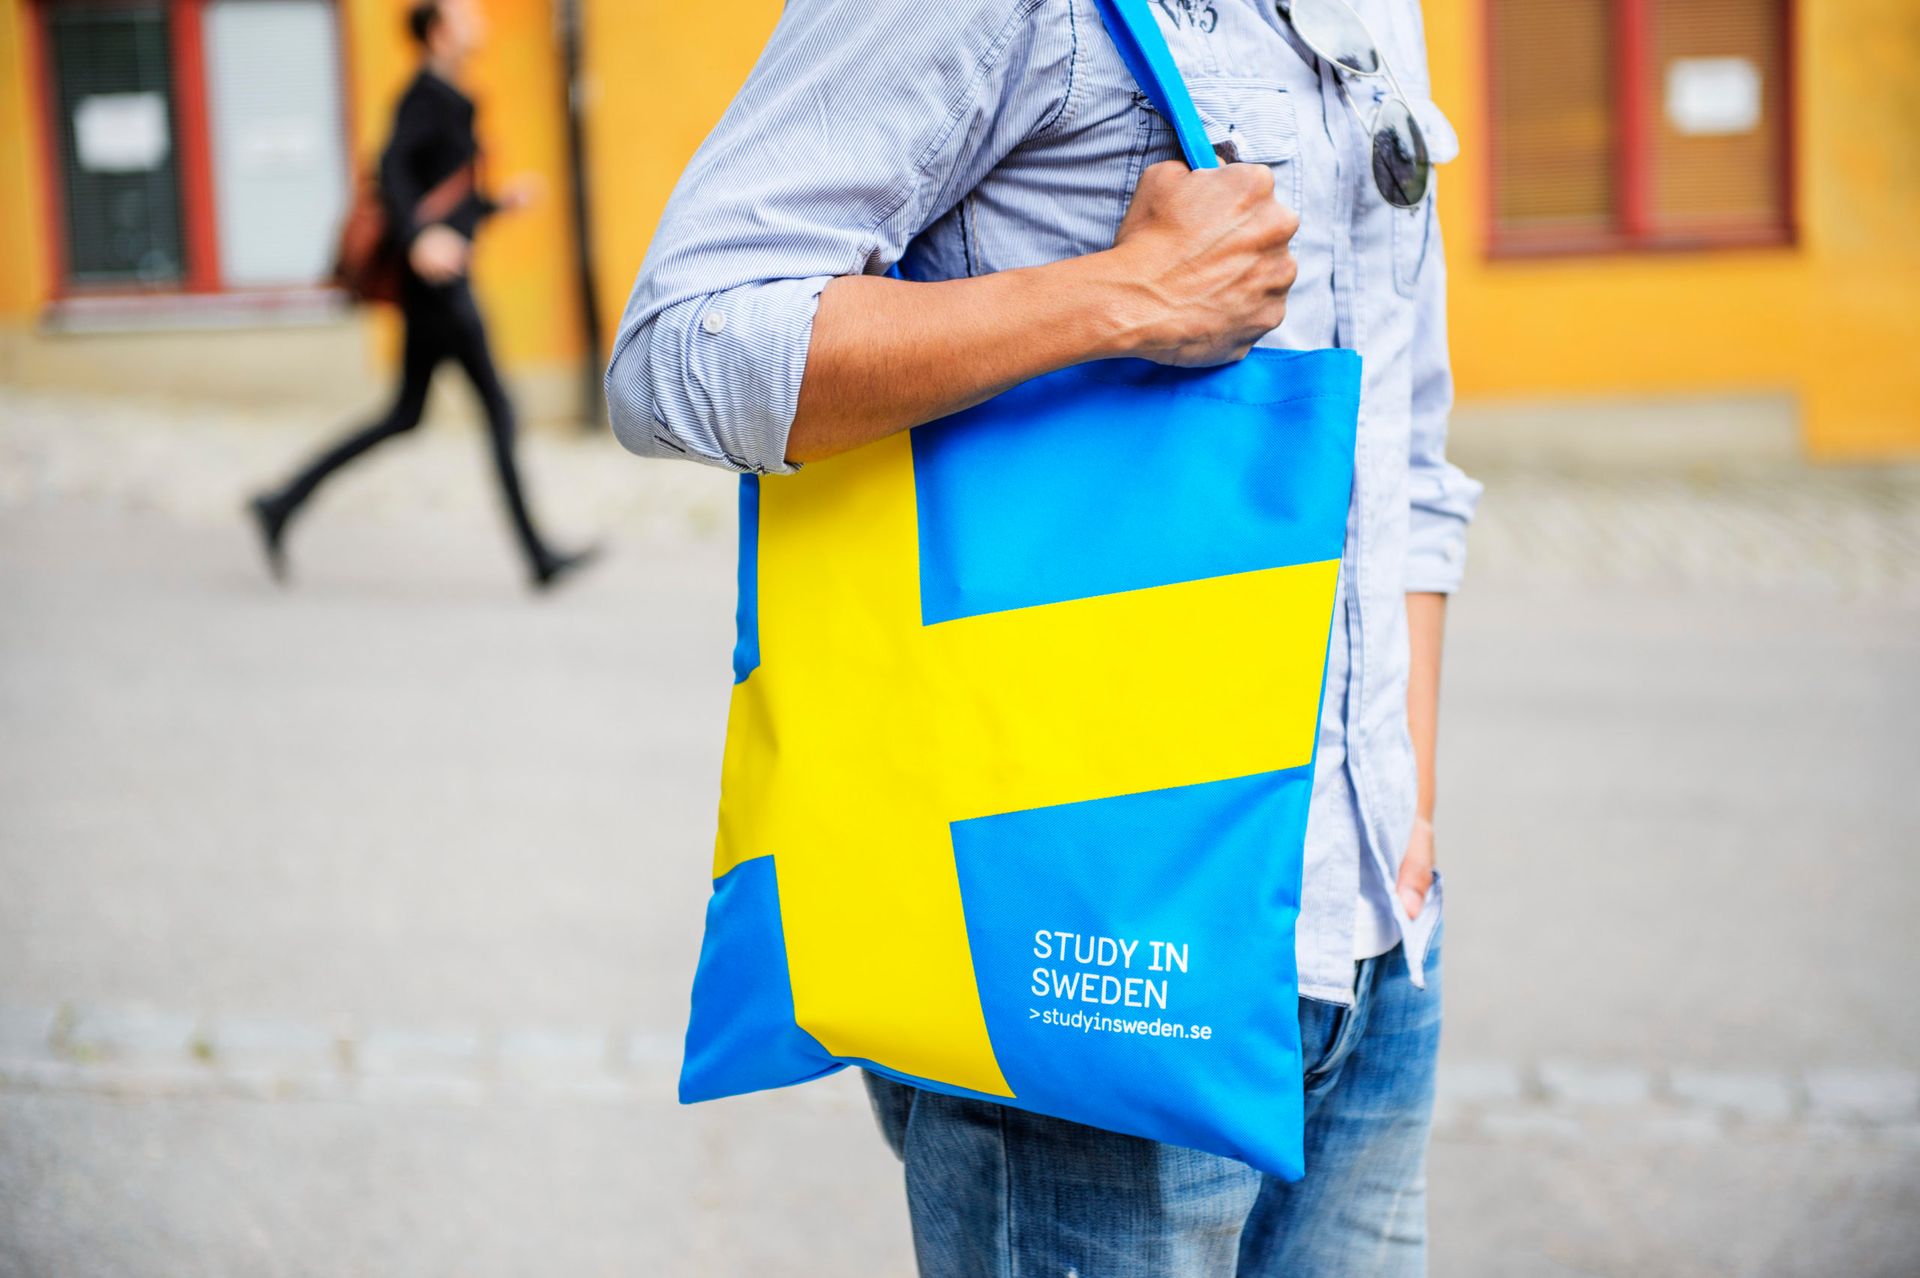 Person holding a blue and yellow tote bag.